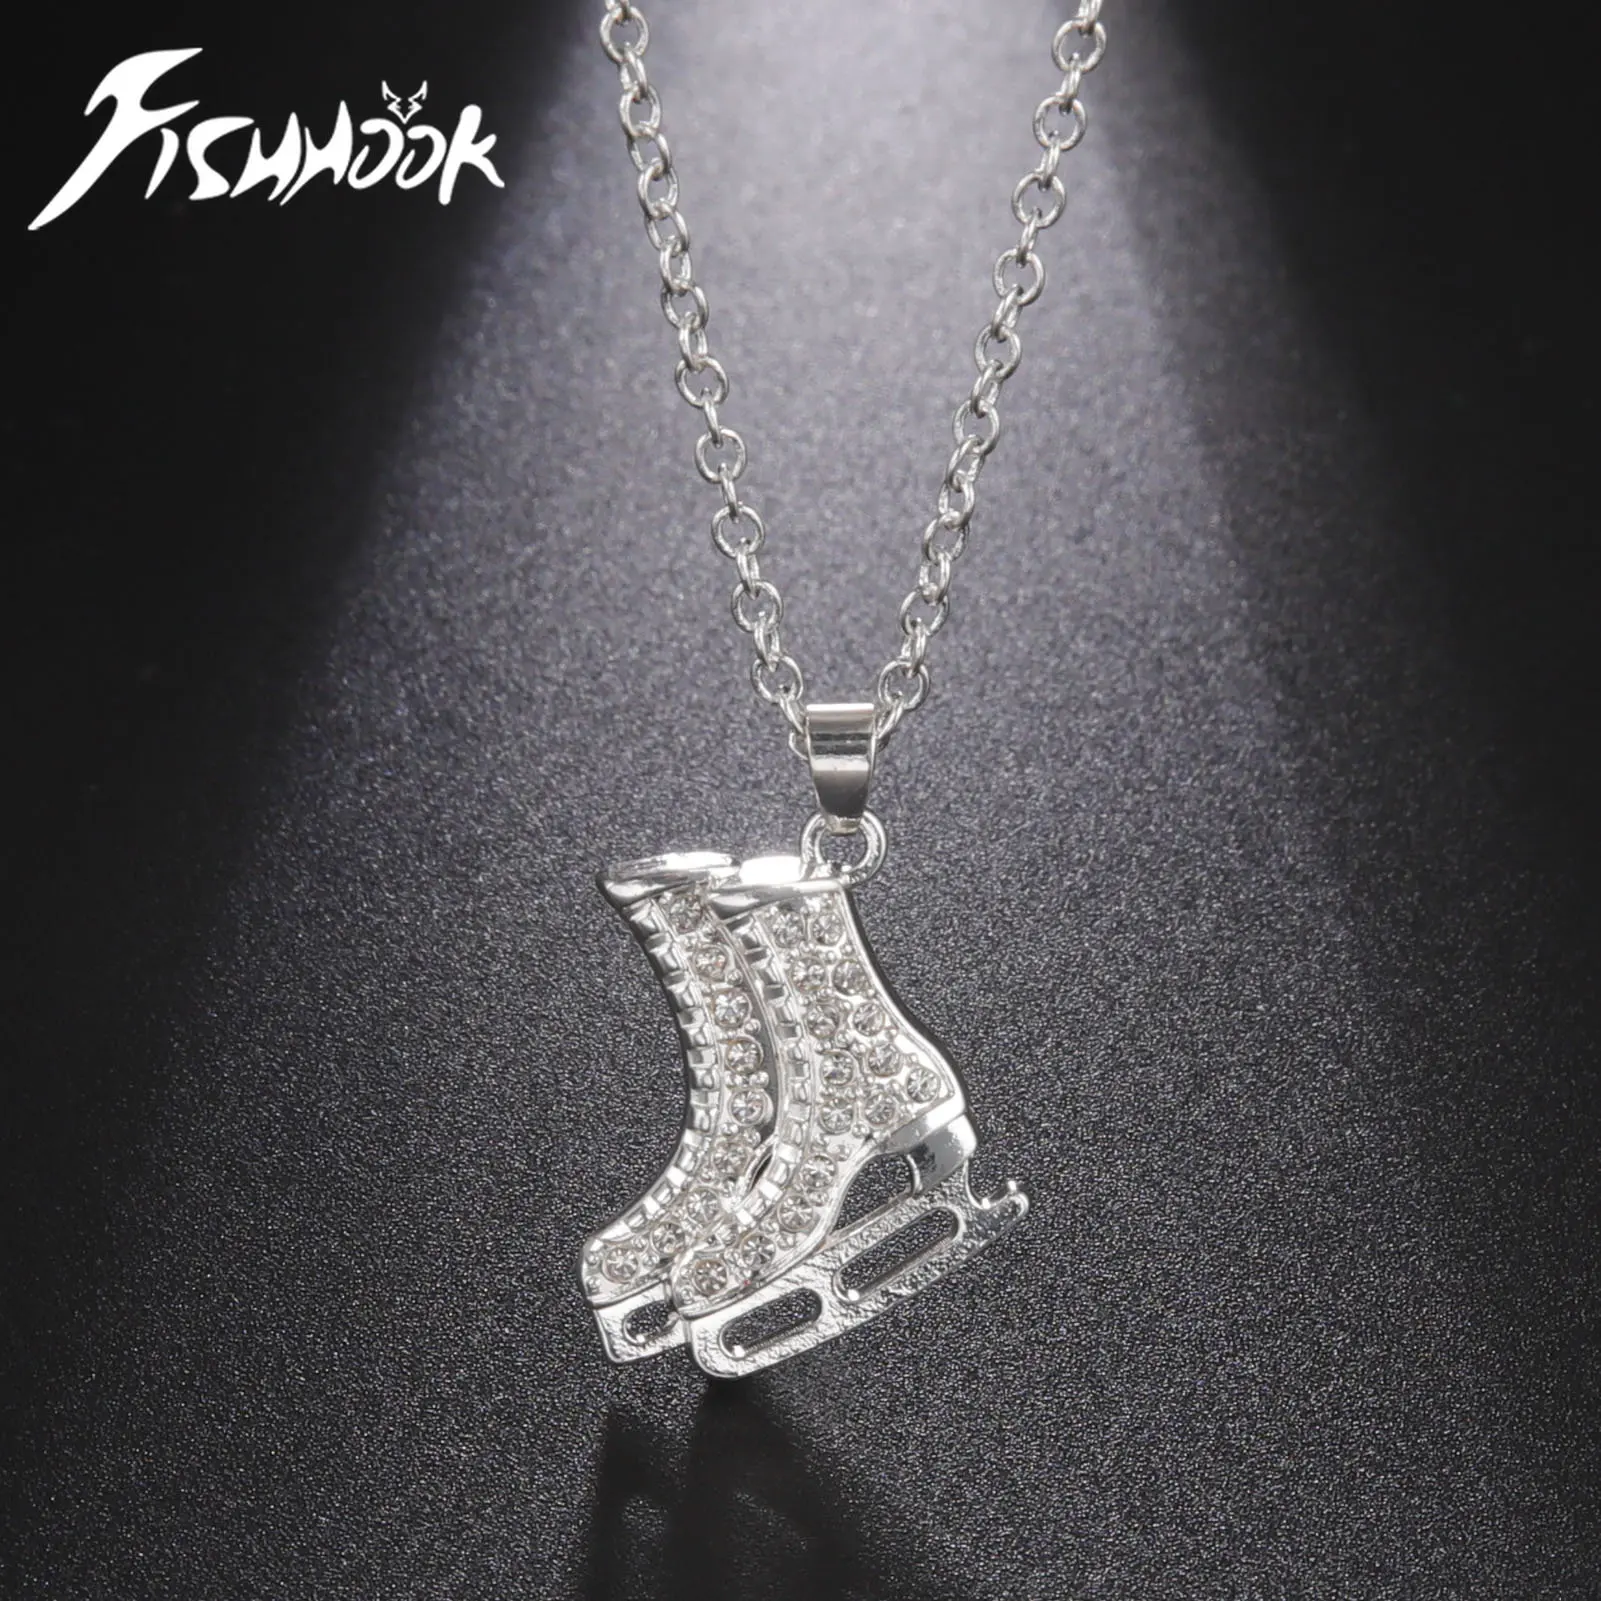 Fishhook Ice Skate Shoe Necklace Roller Skating Chain Crystal Zircon Winter Sports Luxury Gift For Woman Man Kid Child Jewelry